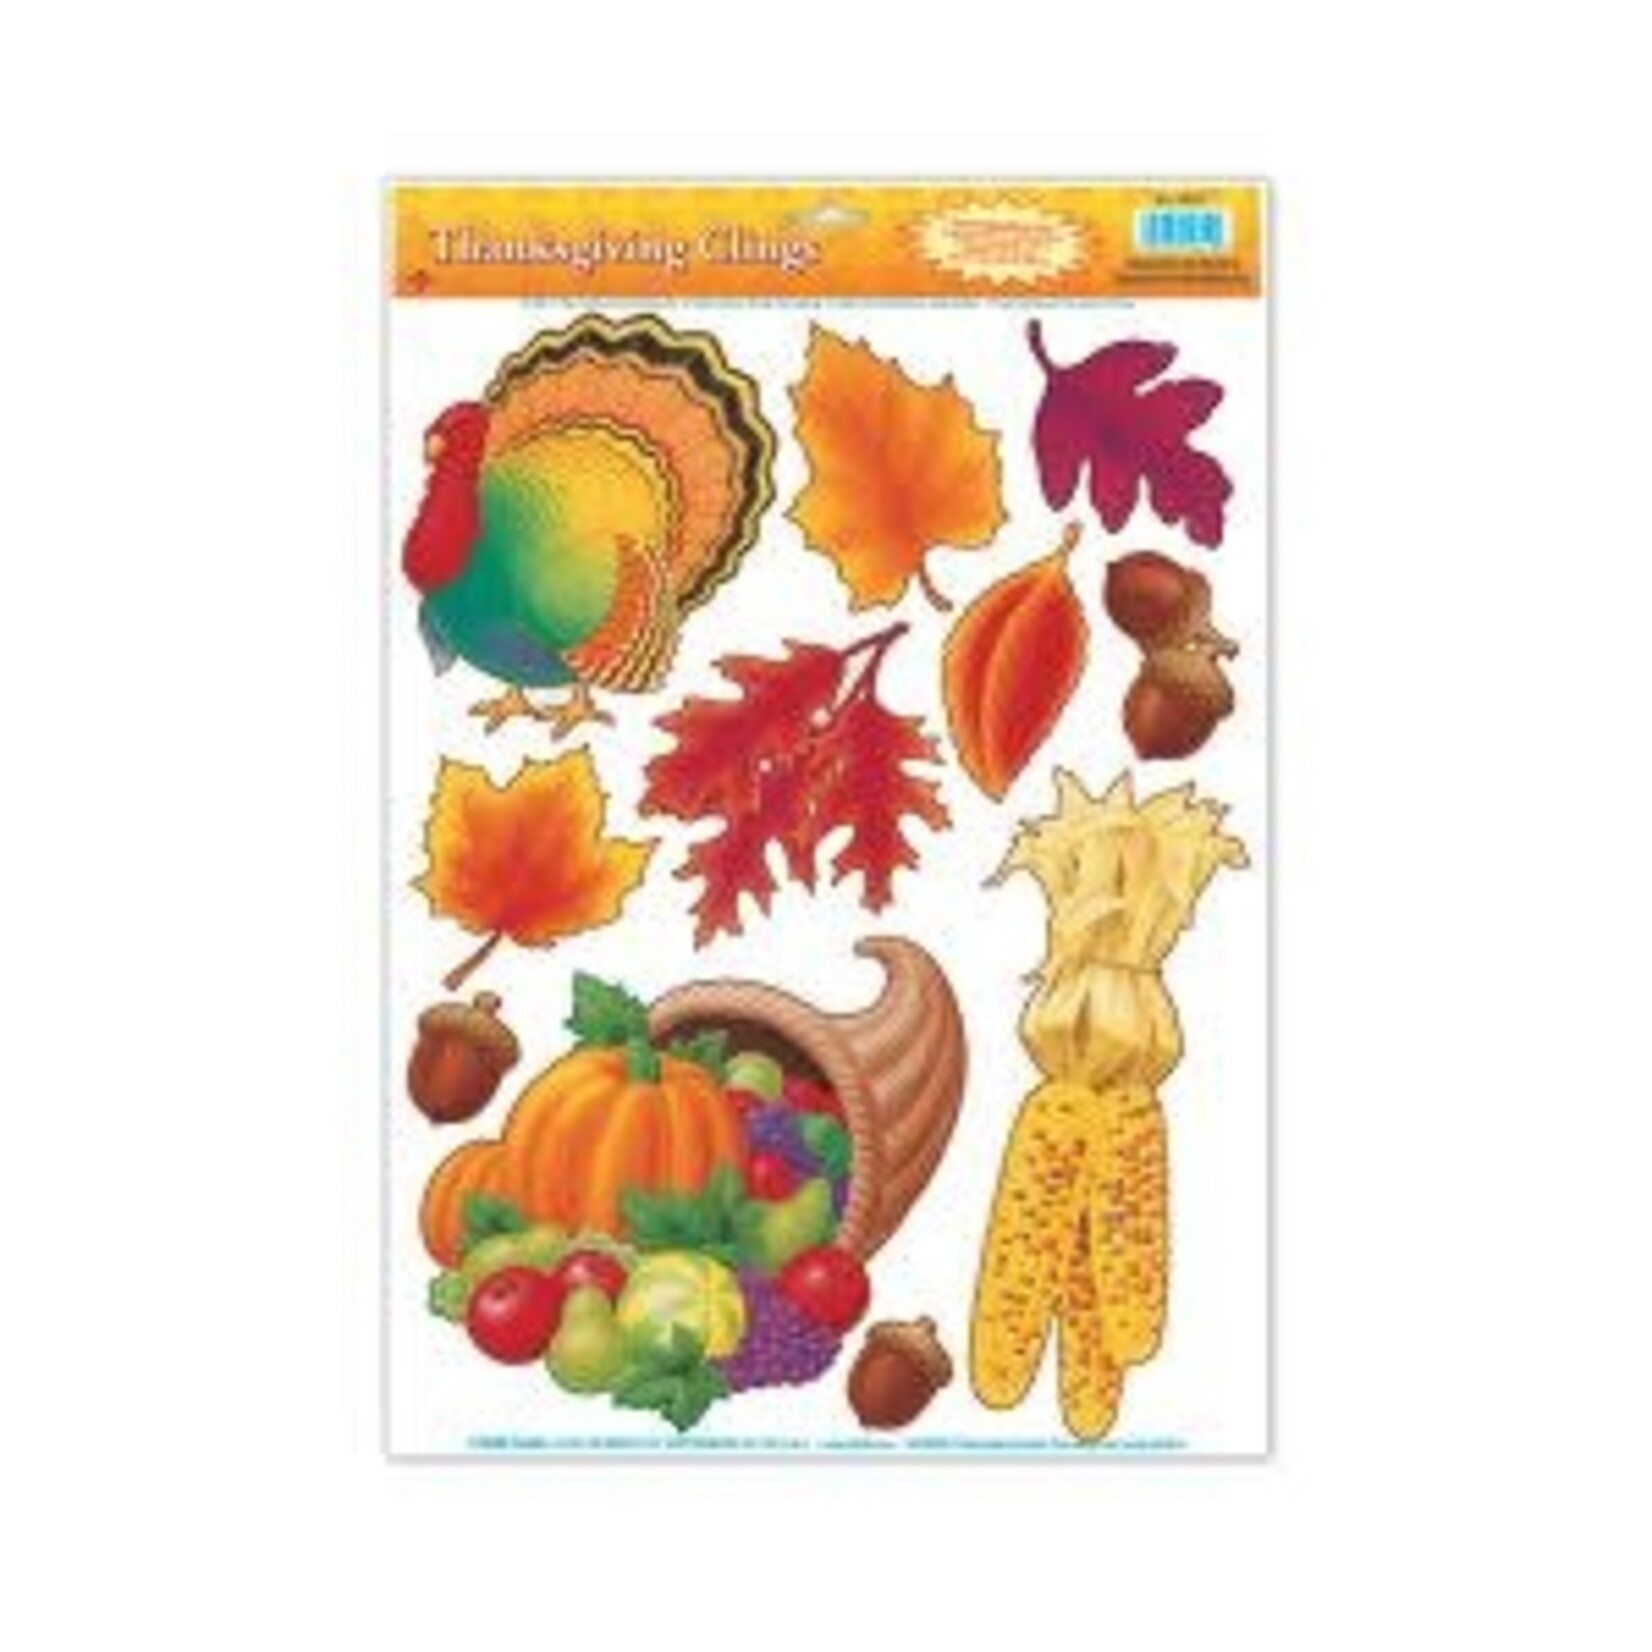 Beistle Thanksgiving Clings - 10ct.